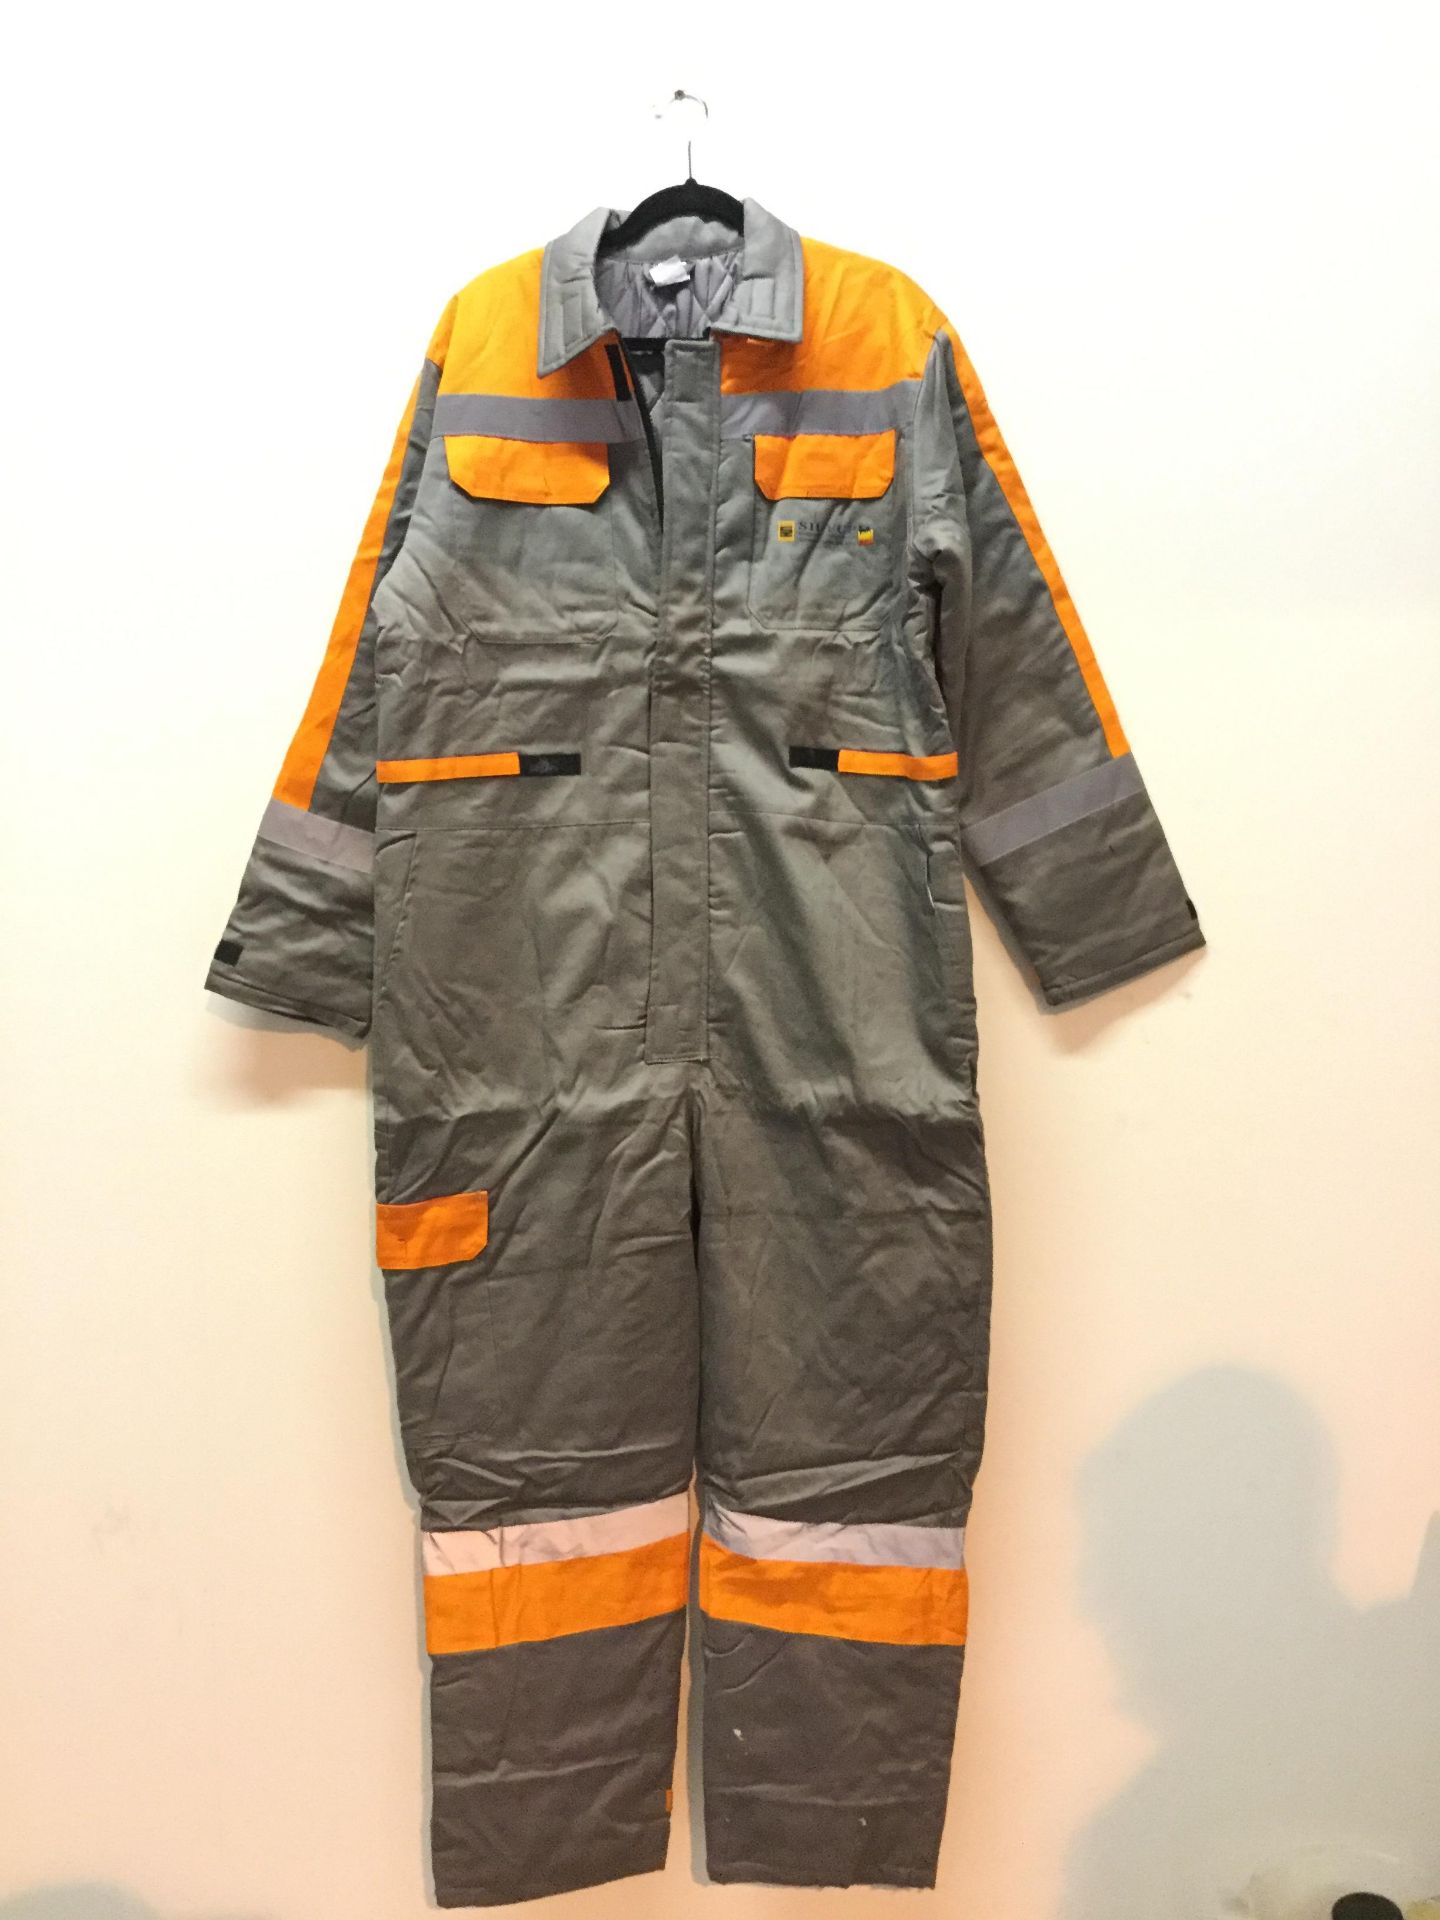 Flame Retardant Winter Coveralls - Size 50 - Image 2 of 2